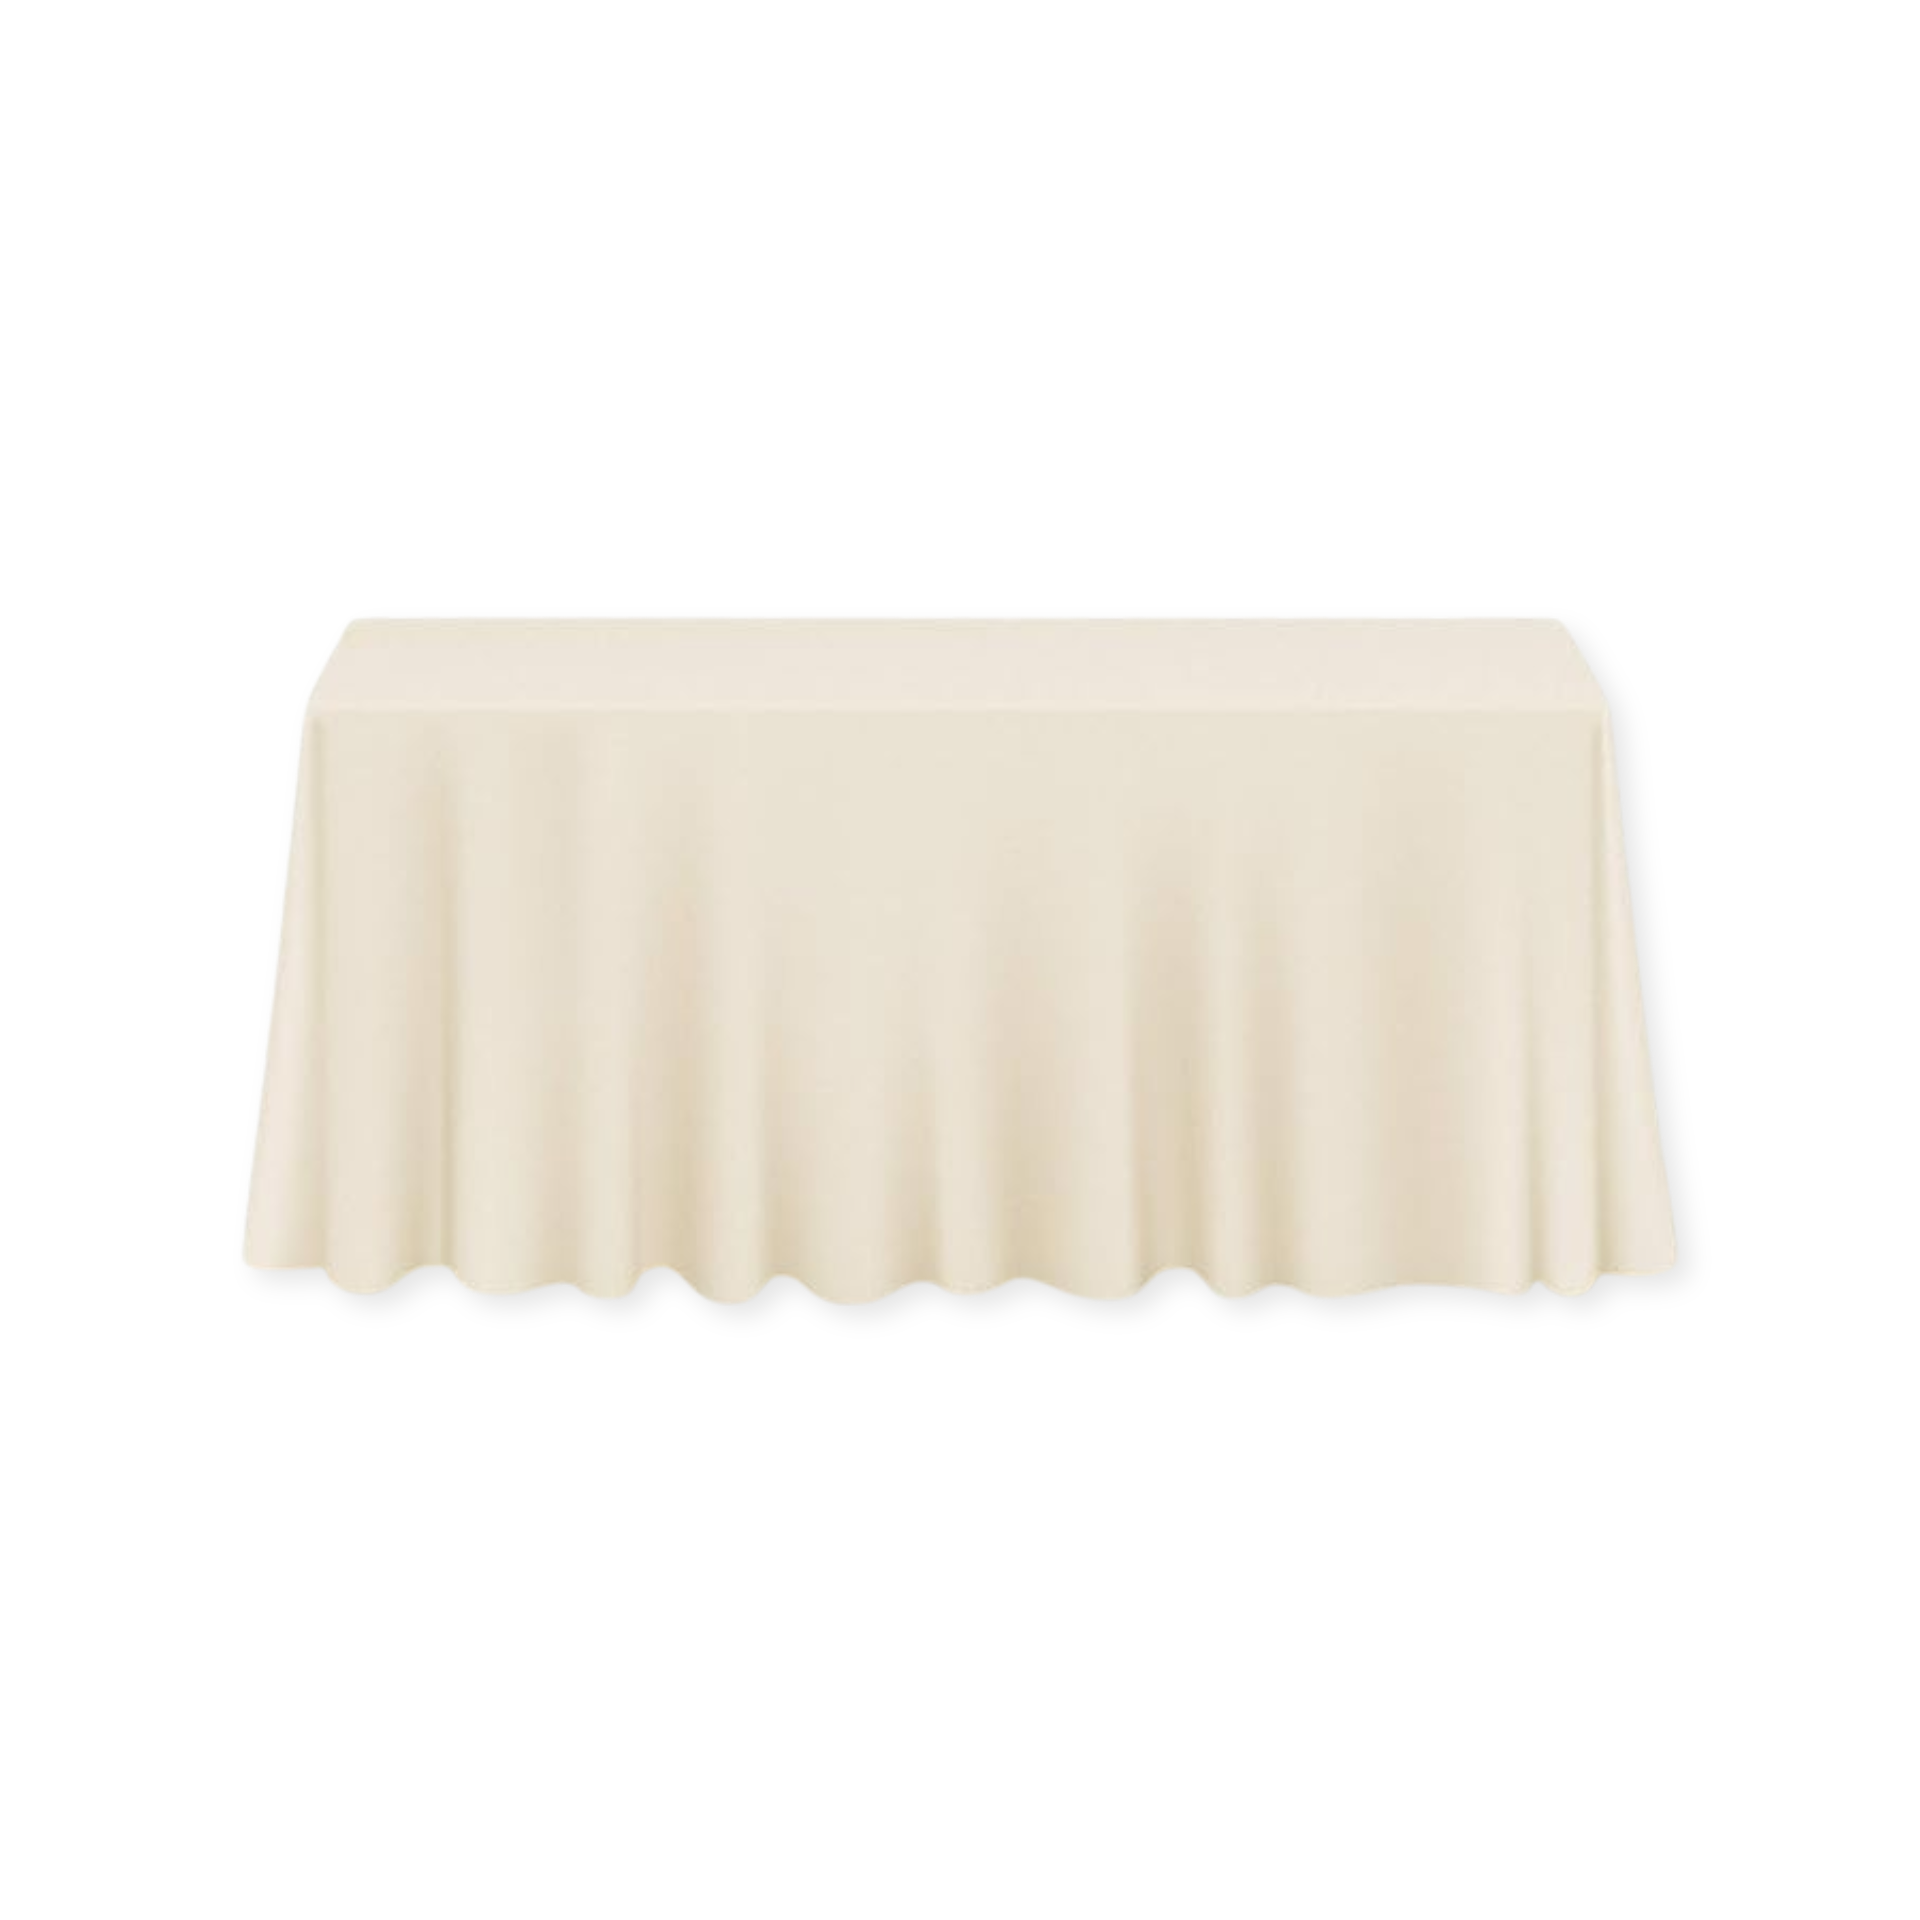 Tablecloth polyester rectangle ivory commercial grade wedding party event rental panama city beach